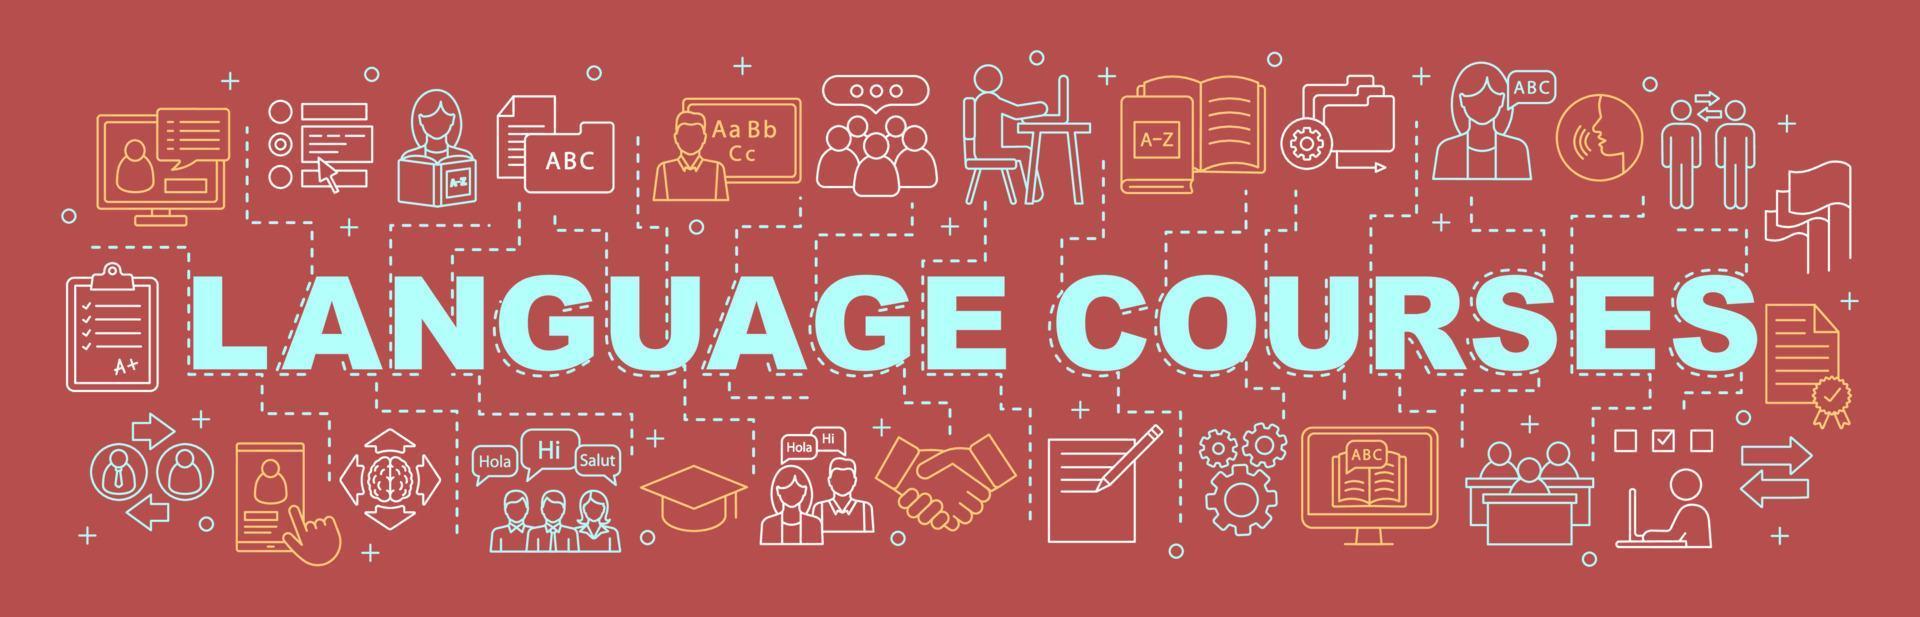 Foreign language learning courses word concepts banner. Isolated lettering typography idea with linear icons. Language, classes, school, lessons. Vector outline illustration